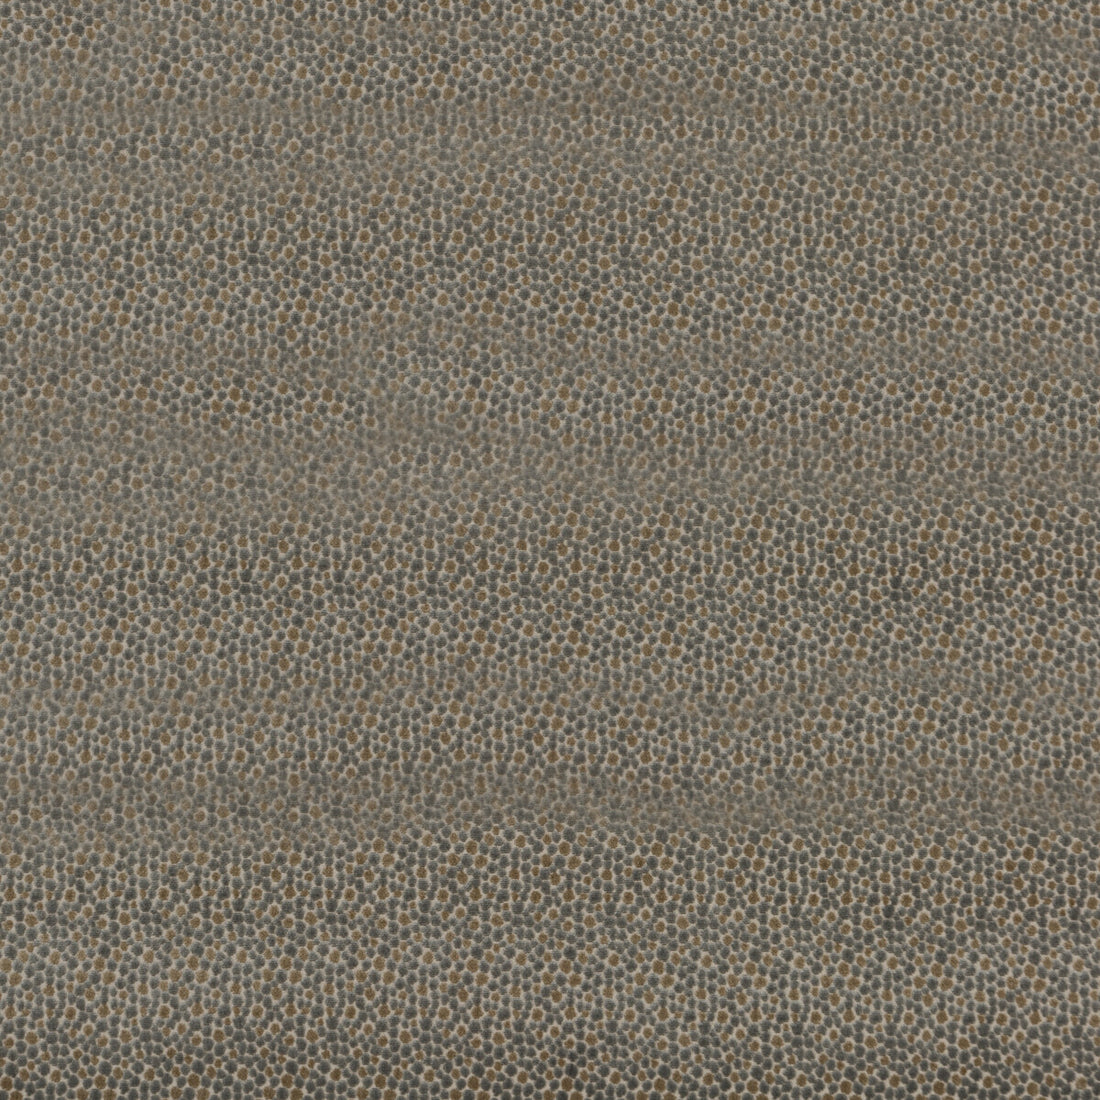 Salsa Two Spot fabric in silver color - pattern PF50424.925.0 - by Baker Lifestyle in the Carnival collection